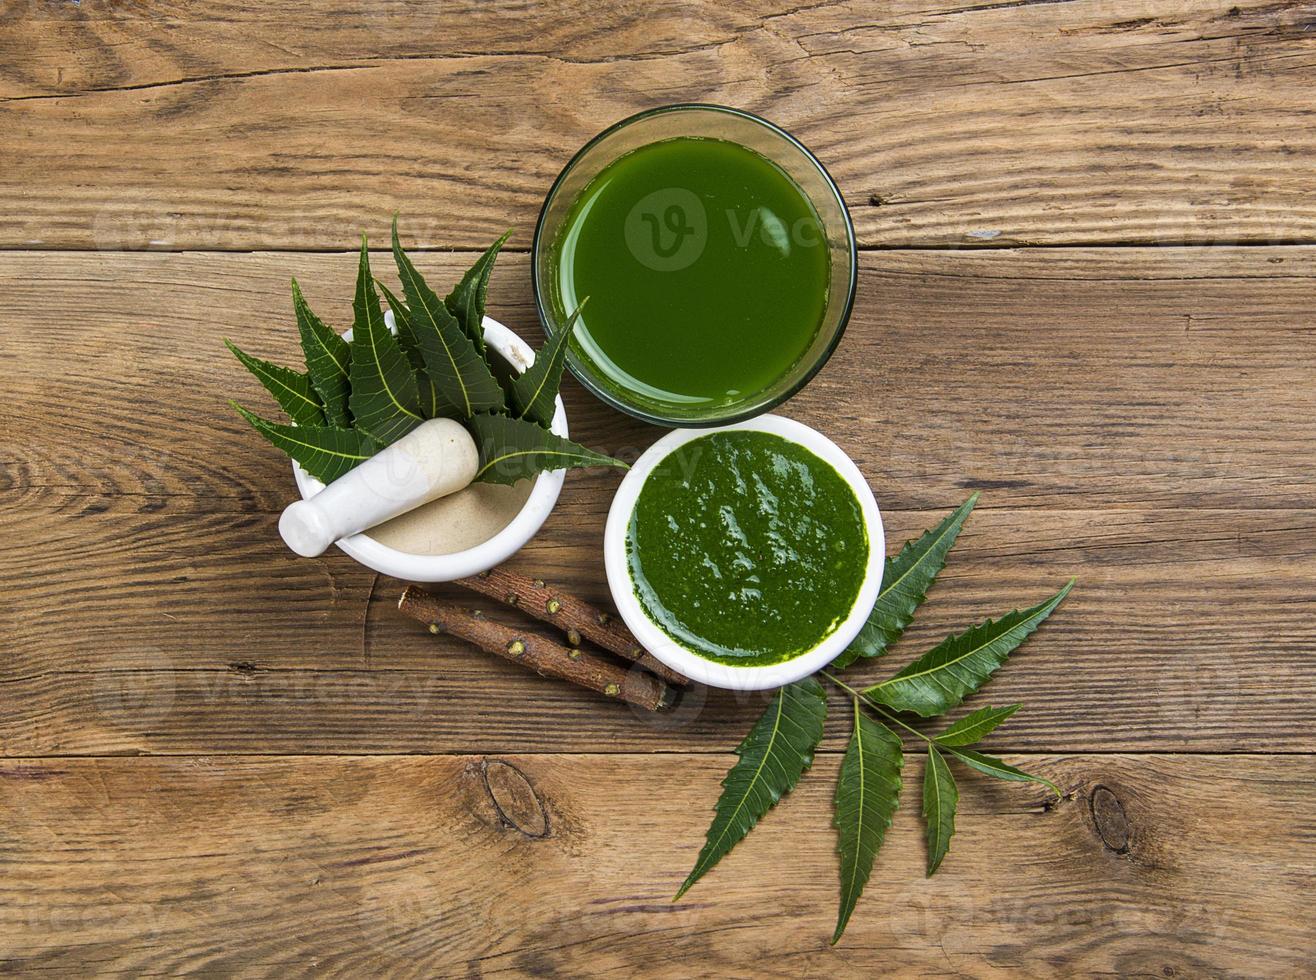 Medicinal Neem leaves in mortar and pestle with neem paste, juice and twigs on wooden background photo